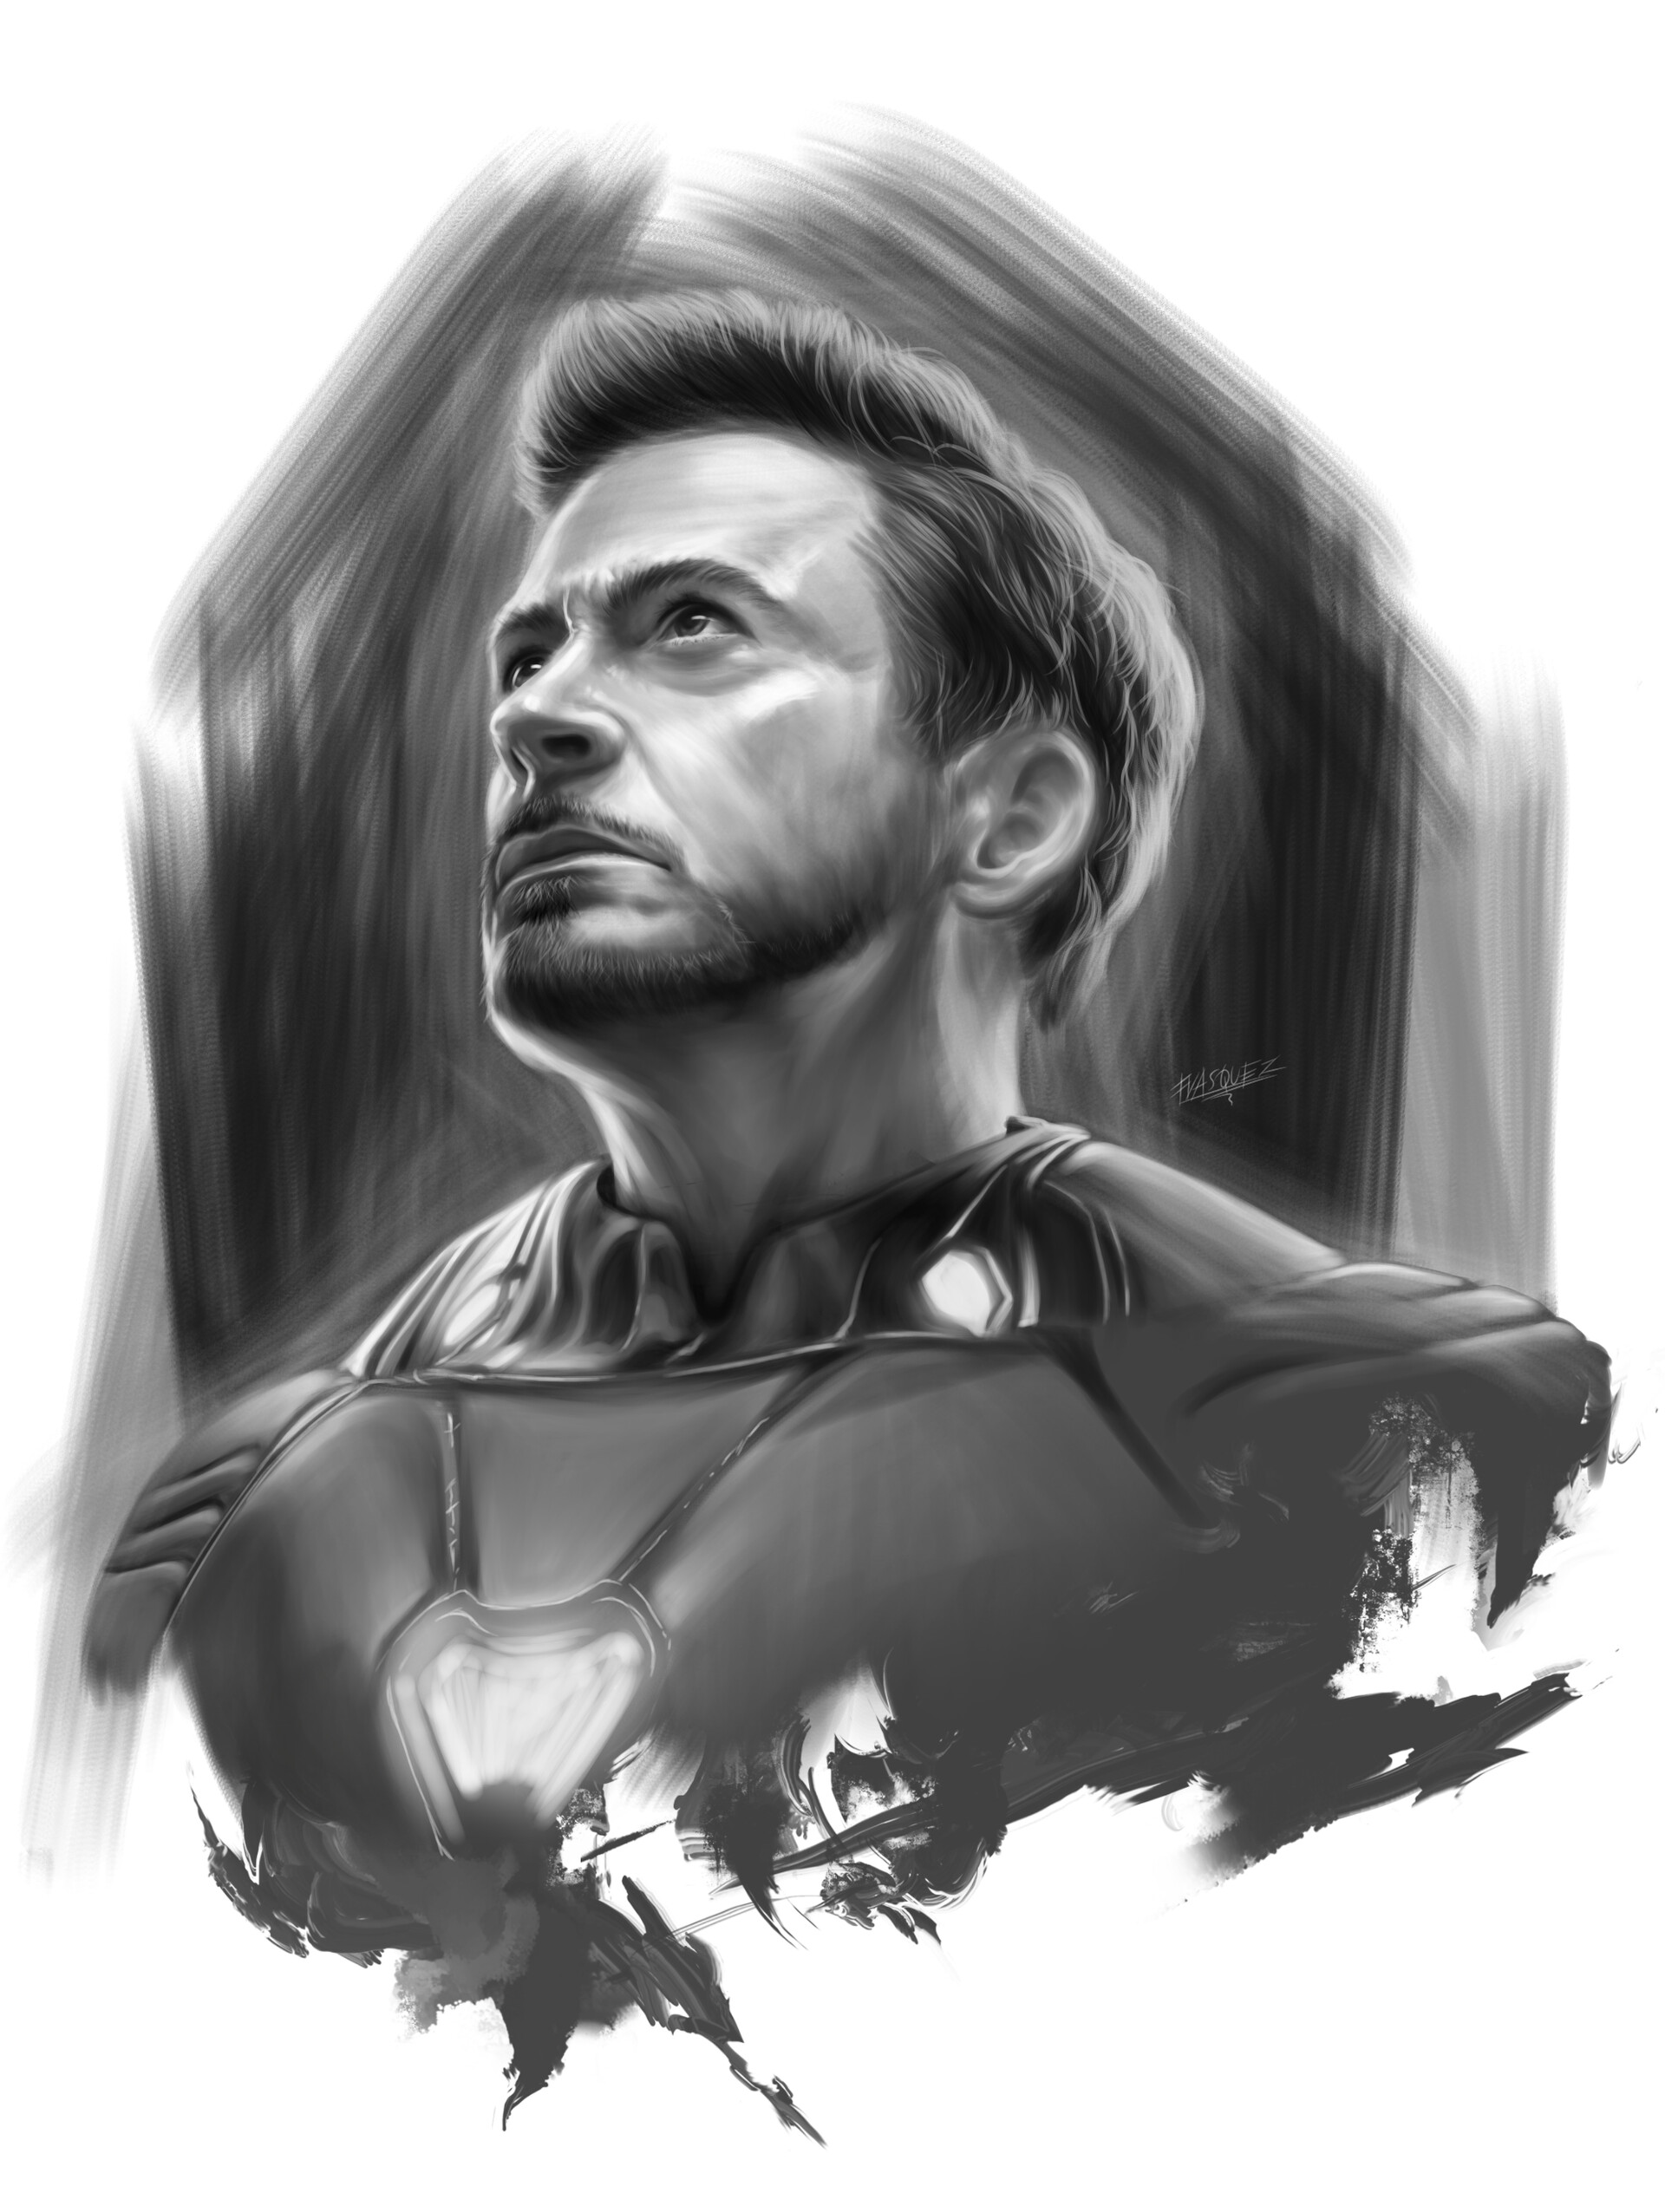 How to Draw Tony Stark | The Avengers | Step-by-Step Tutorial - YouTube